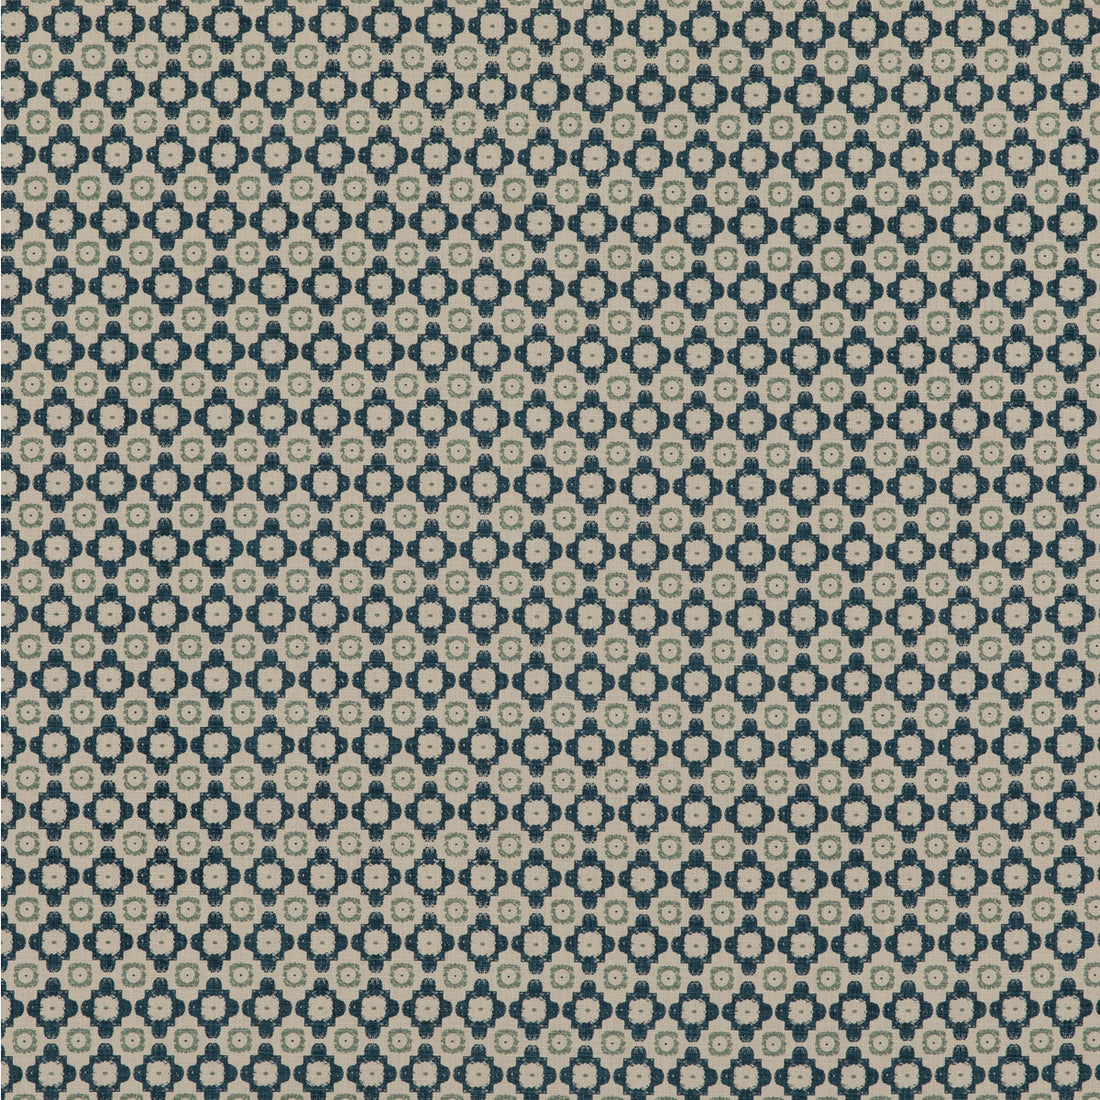 Ambit fabric in indigo color - pattern ED75043.1.0 - by Threads in the Nala Prints collection